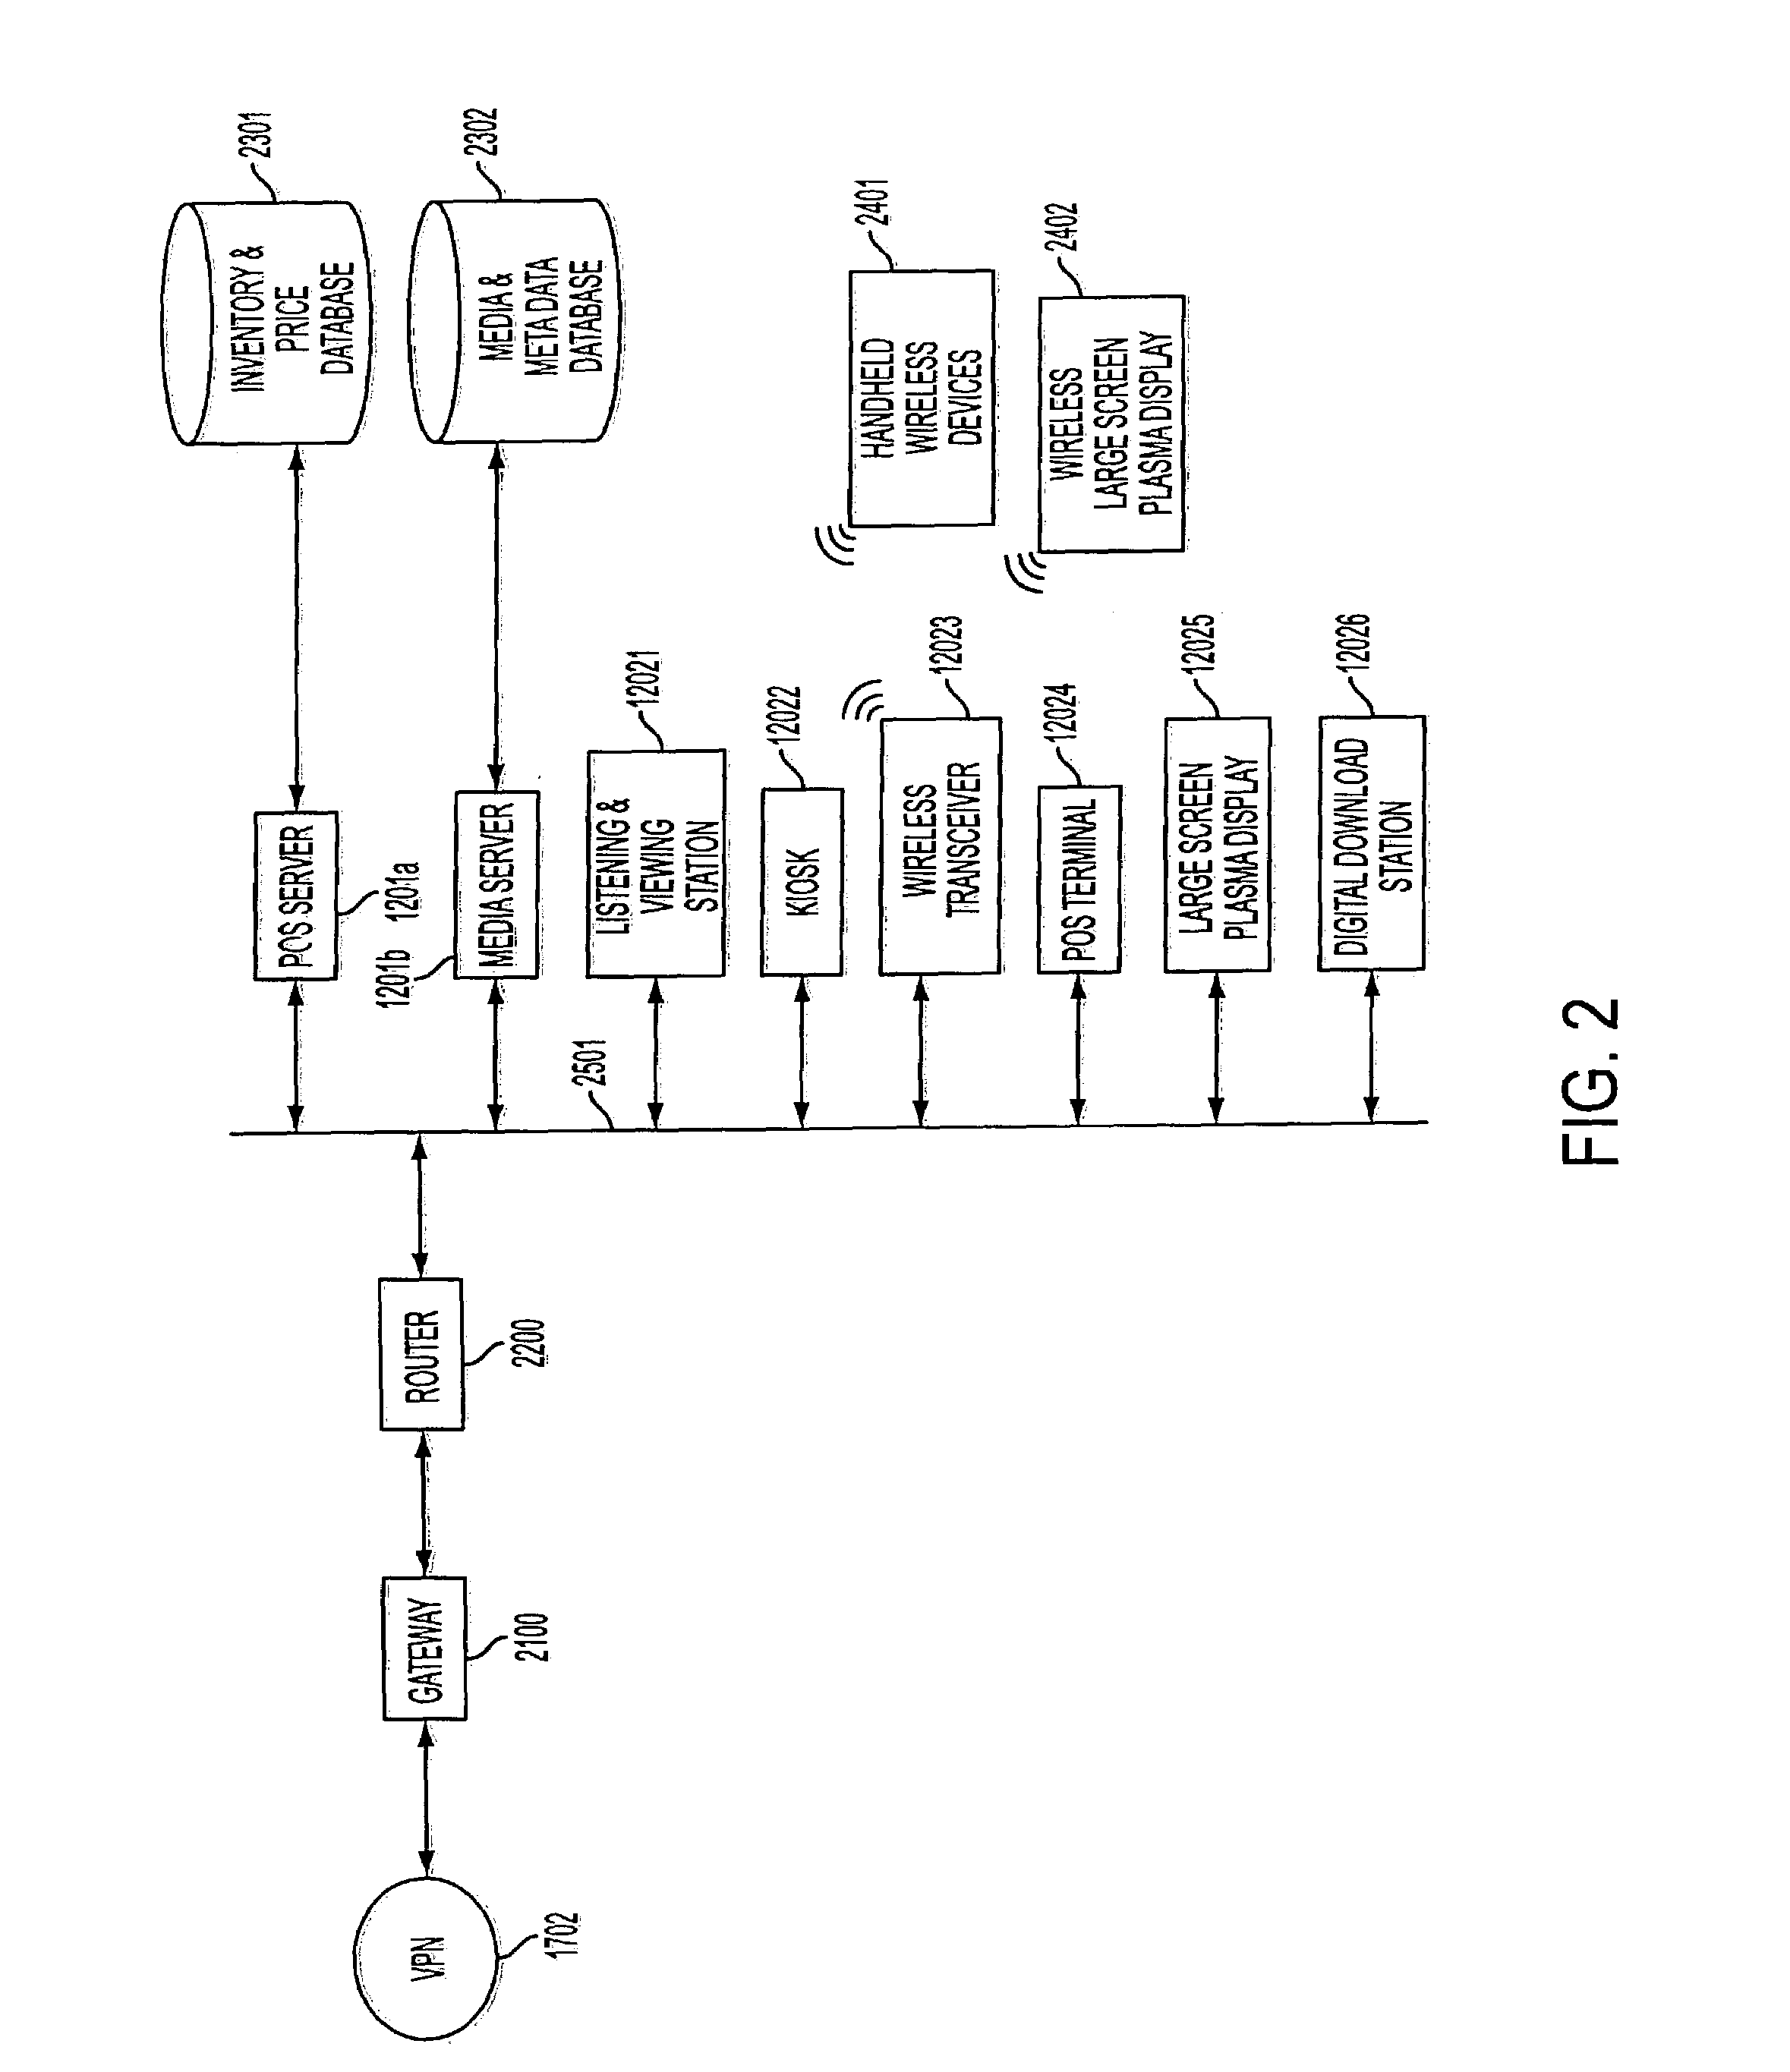 User-personalized media sampling, recommendation and purchasing system using real-time inventory database